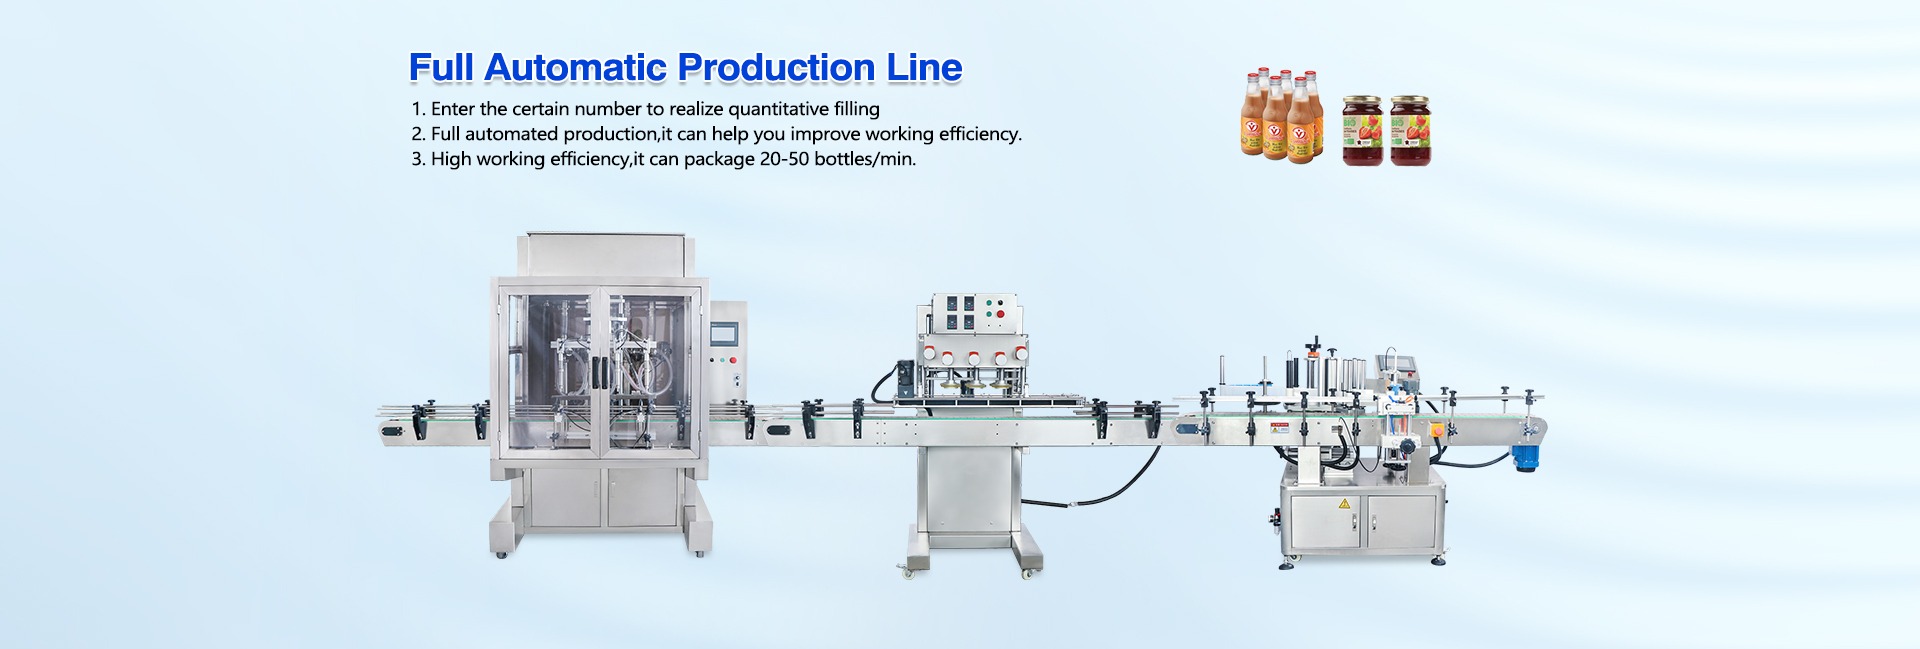 The automatic paste packaging line includes automatic bottle unscrambler, paste filling machine, rotary capping machine, flat round bottle labeling machine and turntable. This type of machine is mainly used for packaging fluids and pastes.